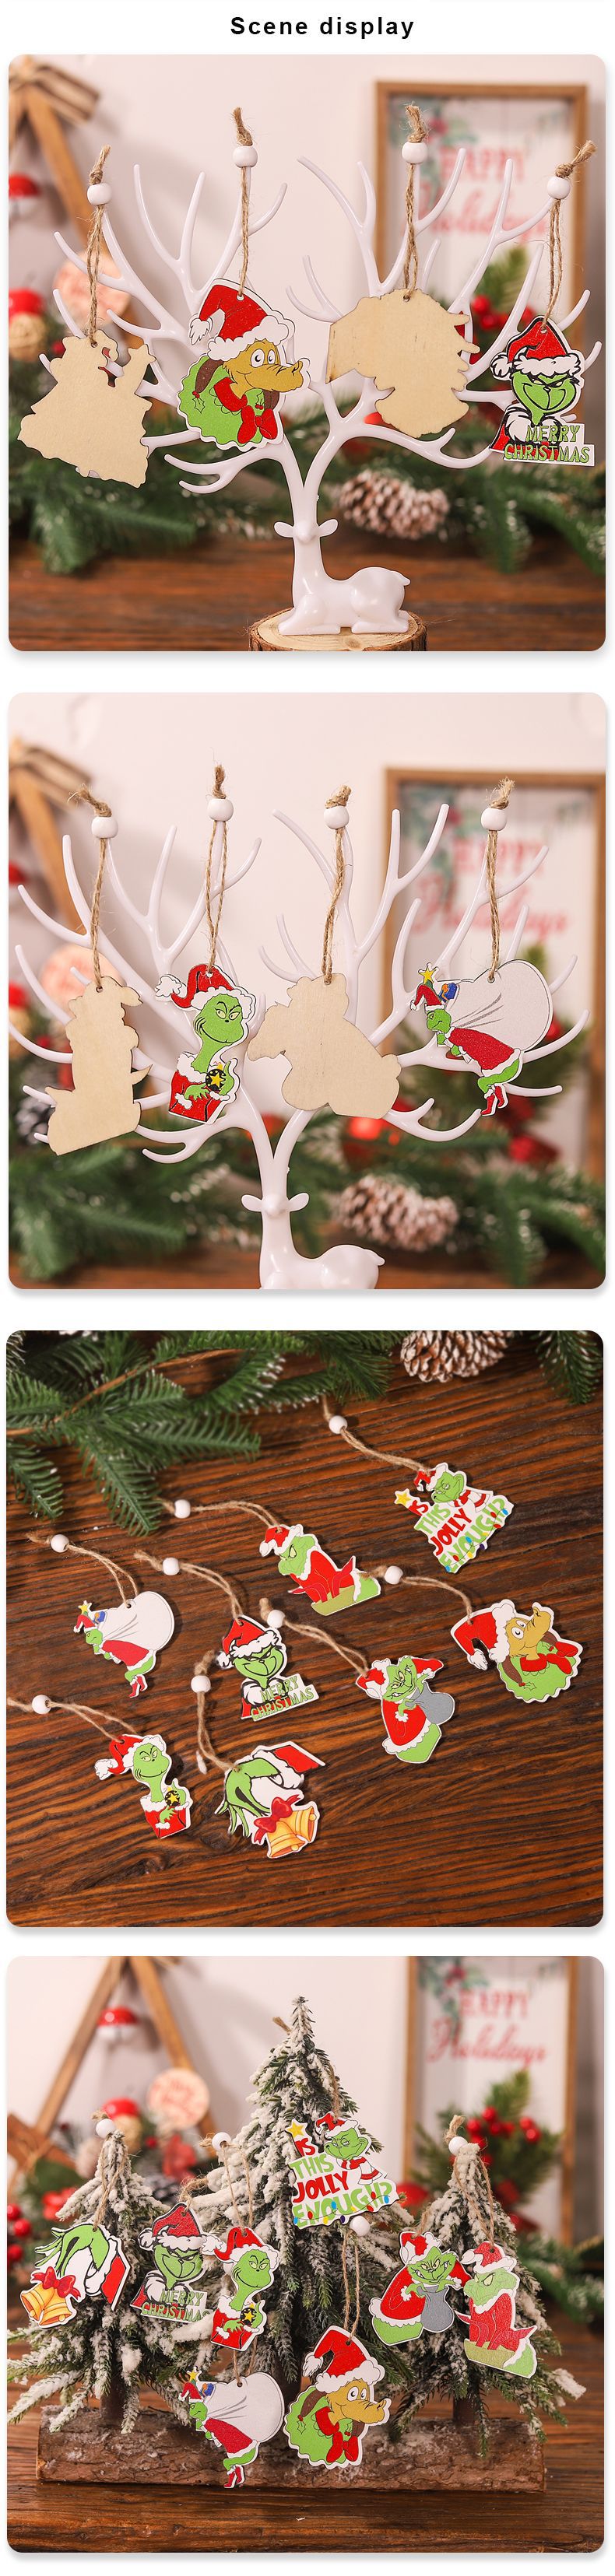 Christmas Cartoon Style Cute Cartoon Character Wood Indoor Party Festival Hanging Ornaments display picture 2